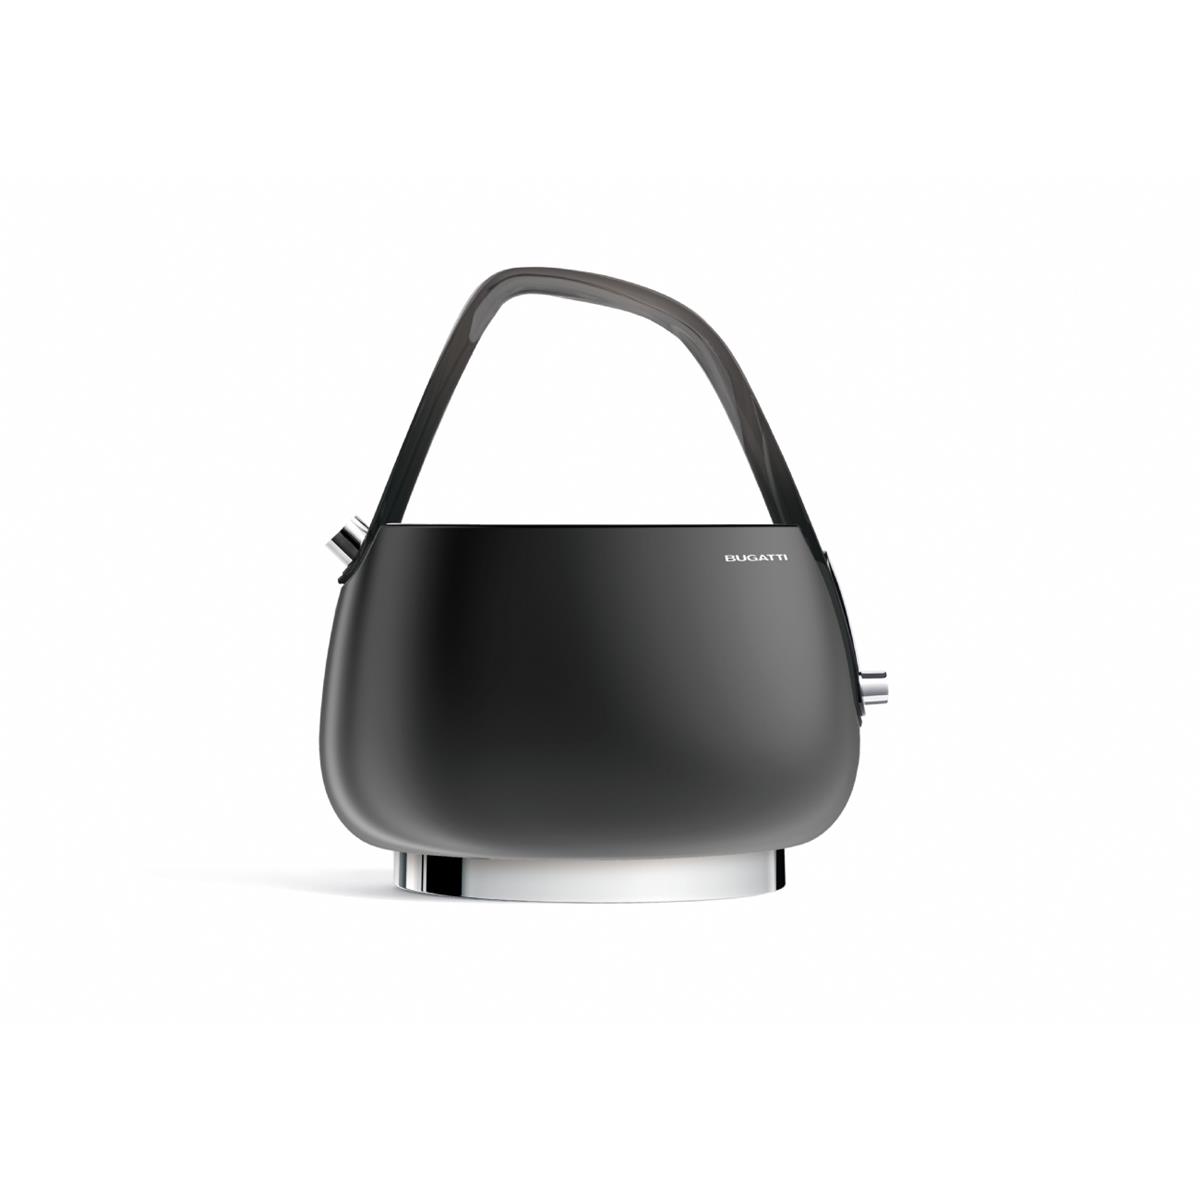 photo jackie - matt black electronic kettle with transparent smoked handle